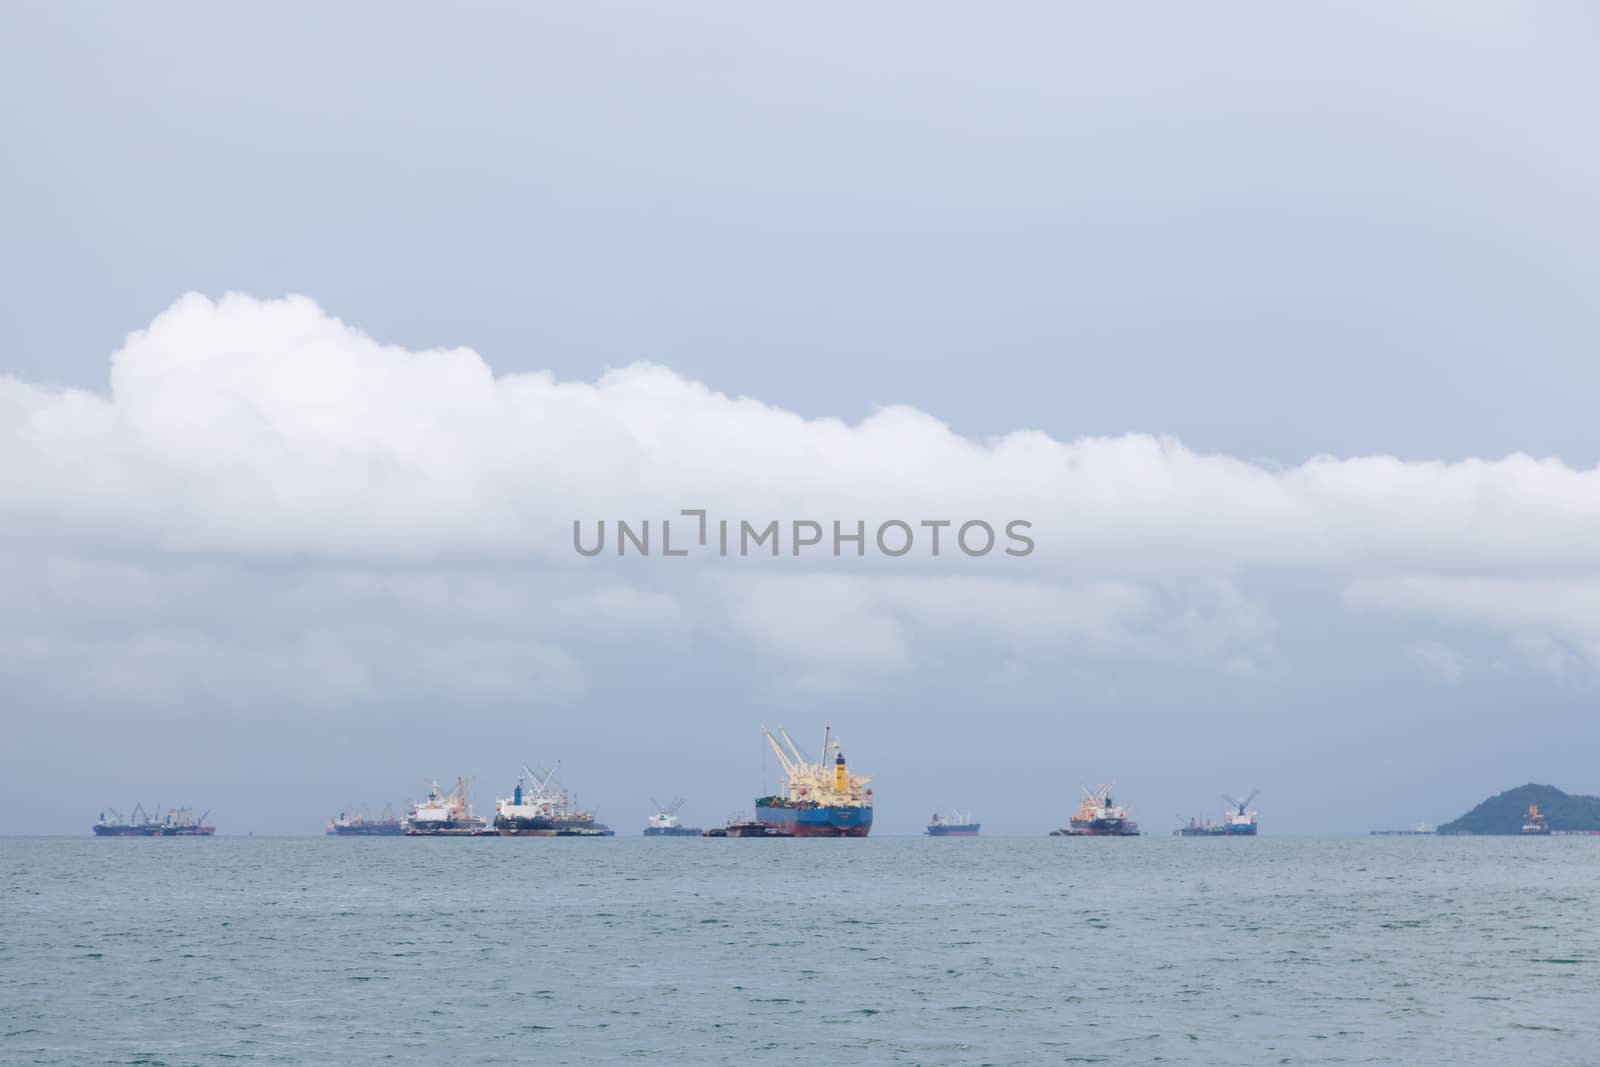 Cargo ship. Parking in the sea to await transportation to the port.